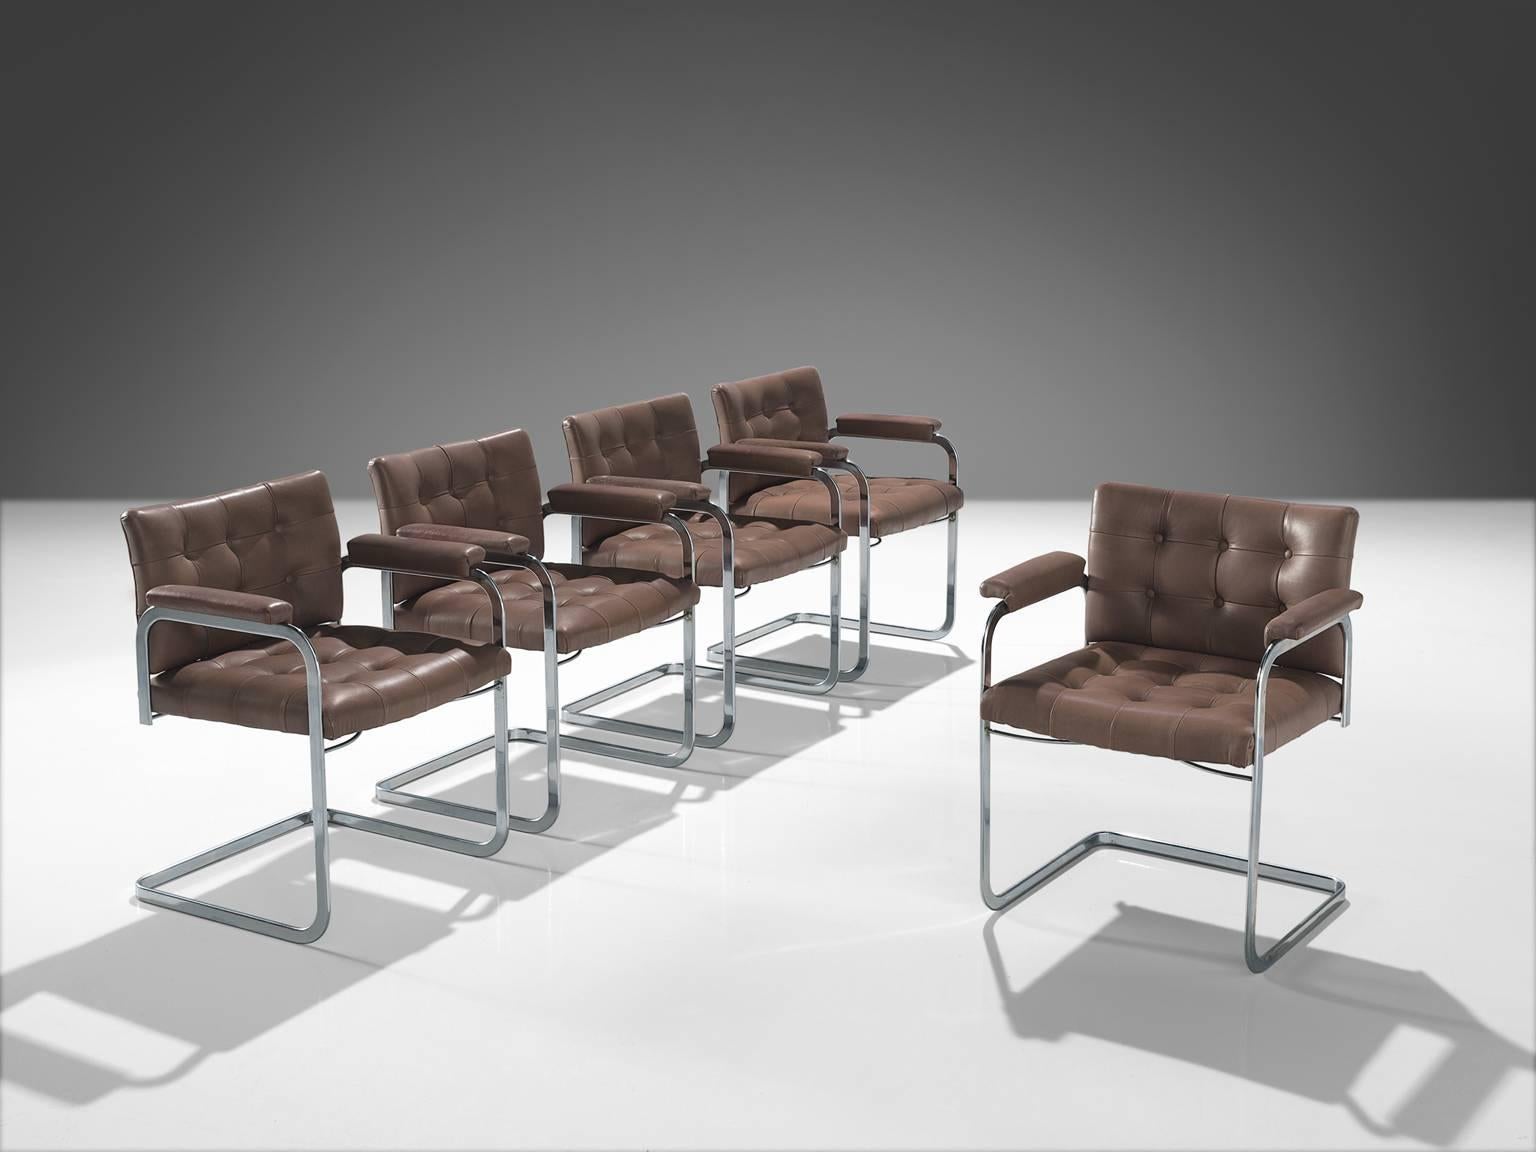 Robert Haussmann and De Sede, set of five 'RH-305', leather and steel, Switzerland, ca. 1950. 

This set of tufted chairs feature a cantilever design and leather padded armchairs. The set is designed by Haussmann for De Sede. The set has a business